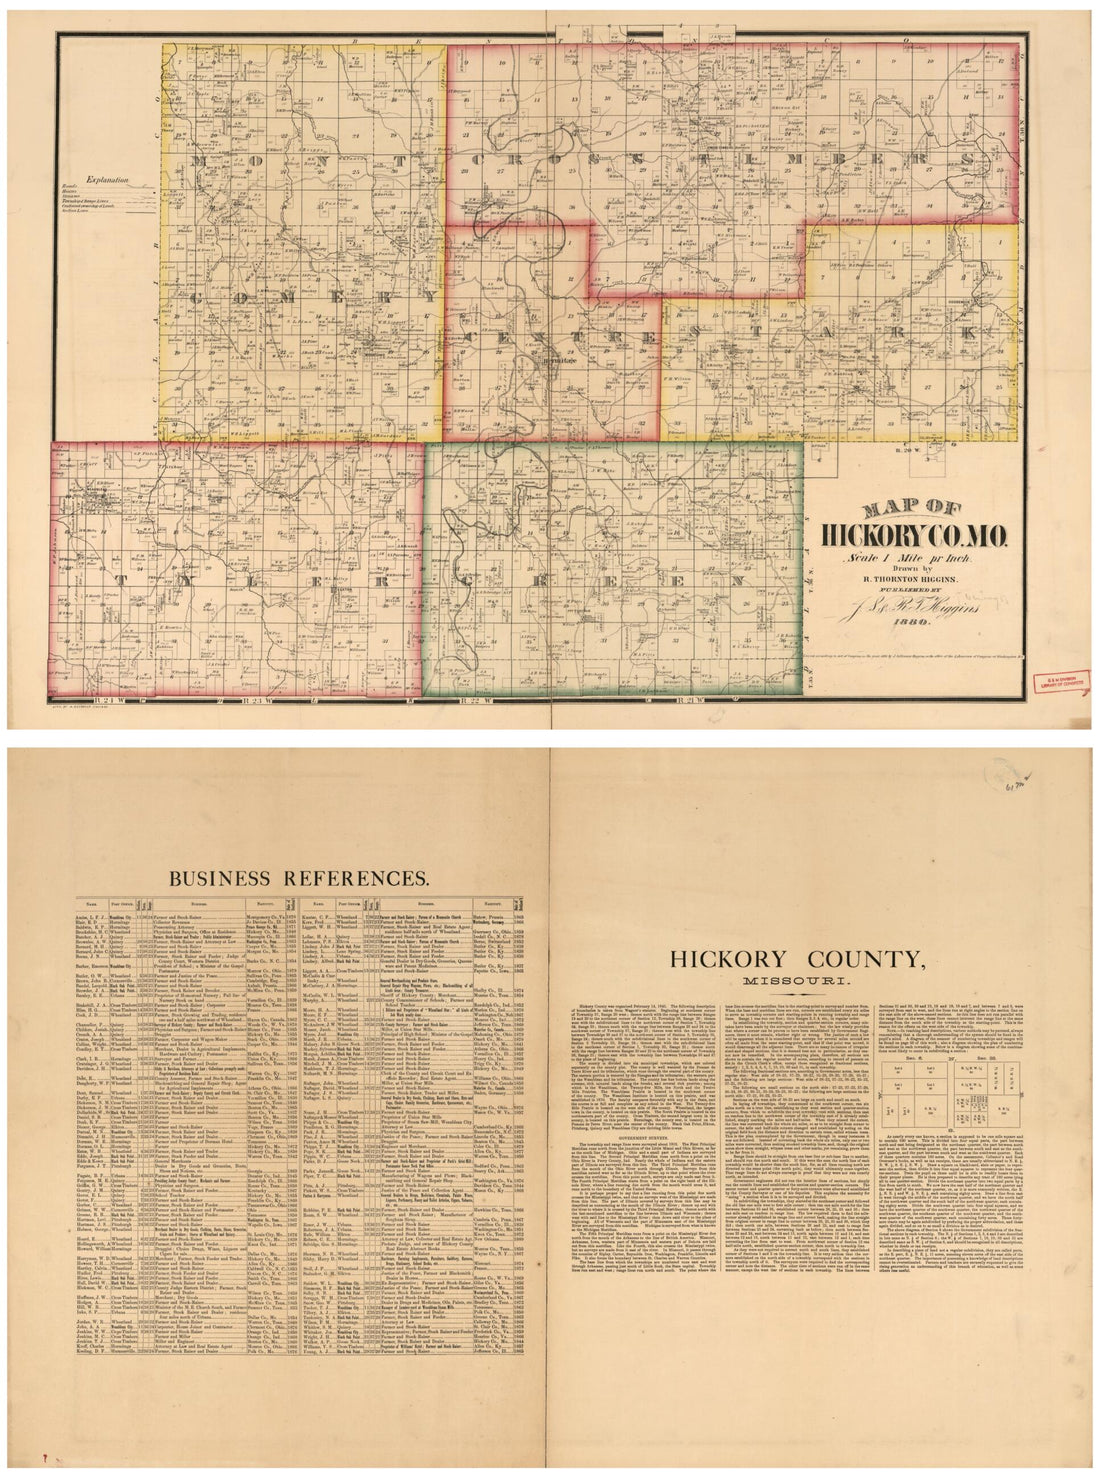 This old map of Map of Hickory Co., Mo. (Map of Hickory County, Missouri, Hickory County, Missouri) from 1880 was created by R. T. (R. Thornton) Higgins in 1880